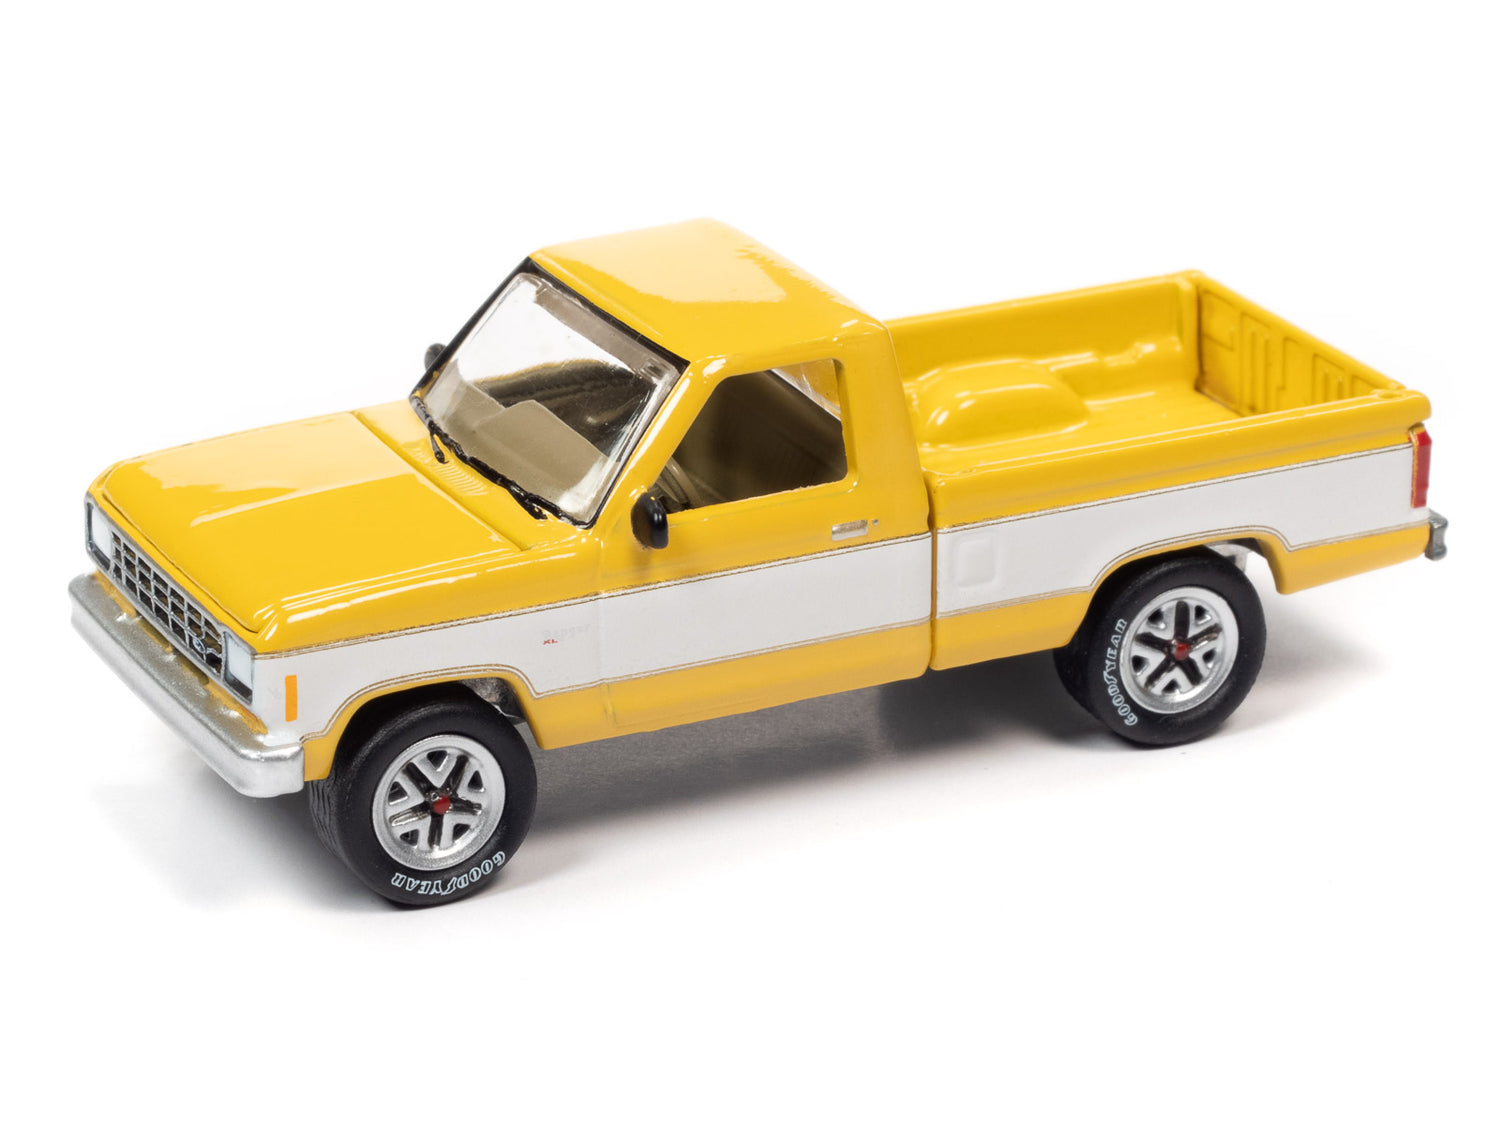 Johnny Lightning Classic Gold 1983 Ford Ranger (Yellow w/White Two-tone) 1:64 Scale Diecast